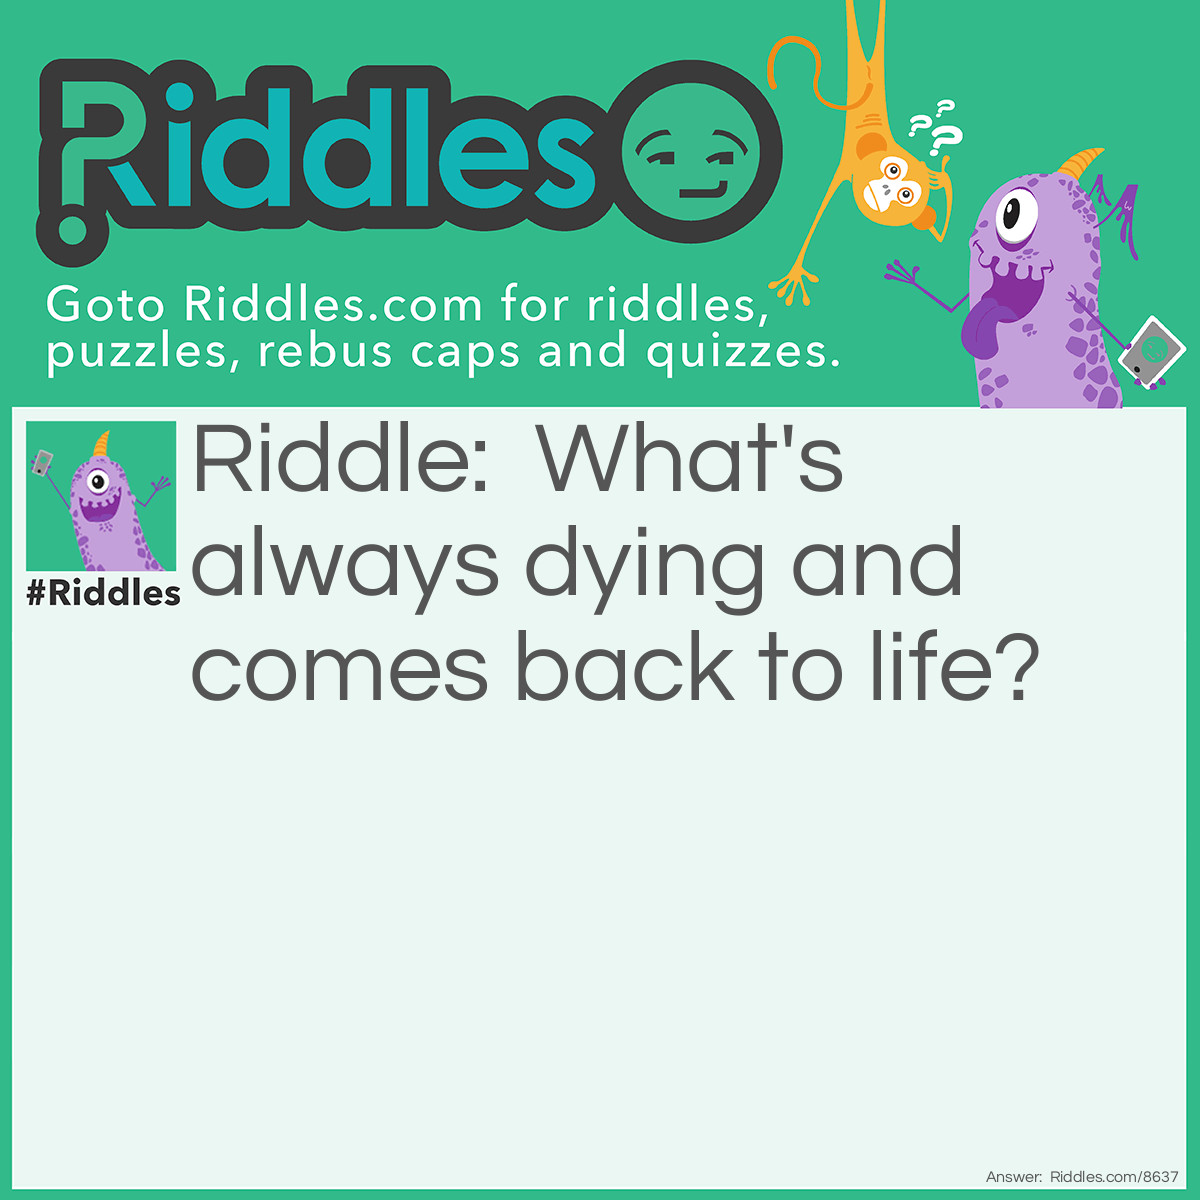 Riddle: What's always dying and comes back to life? Answer: Star Wars characters.